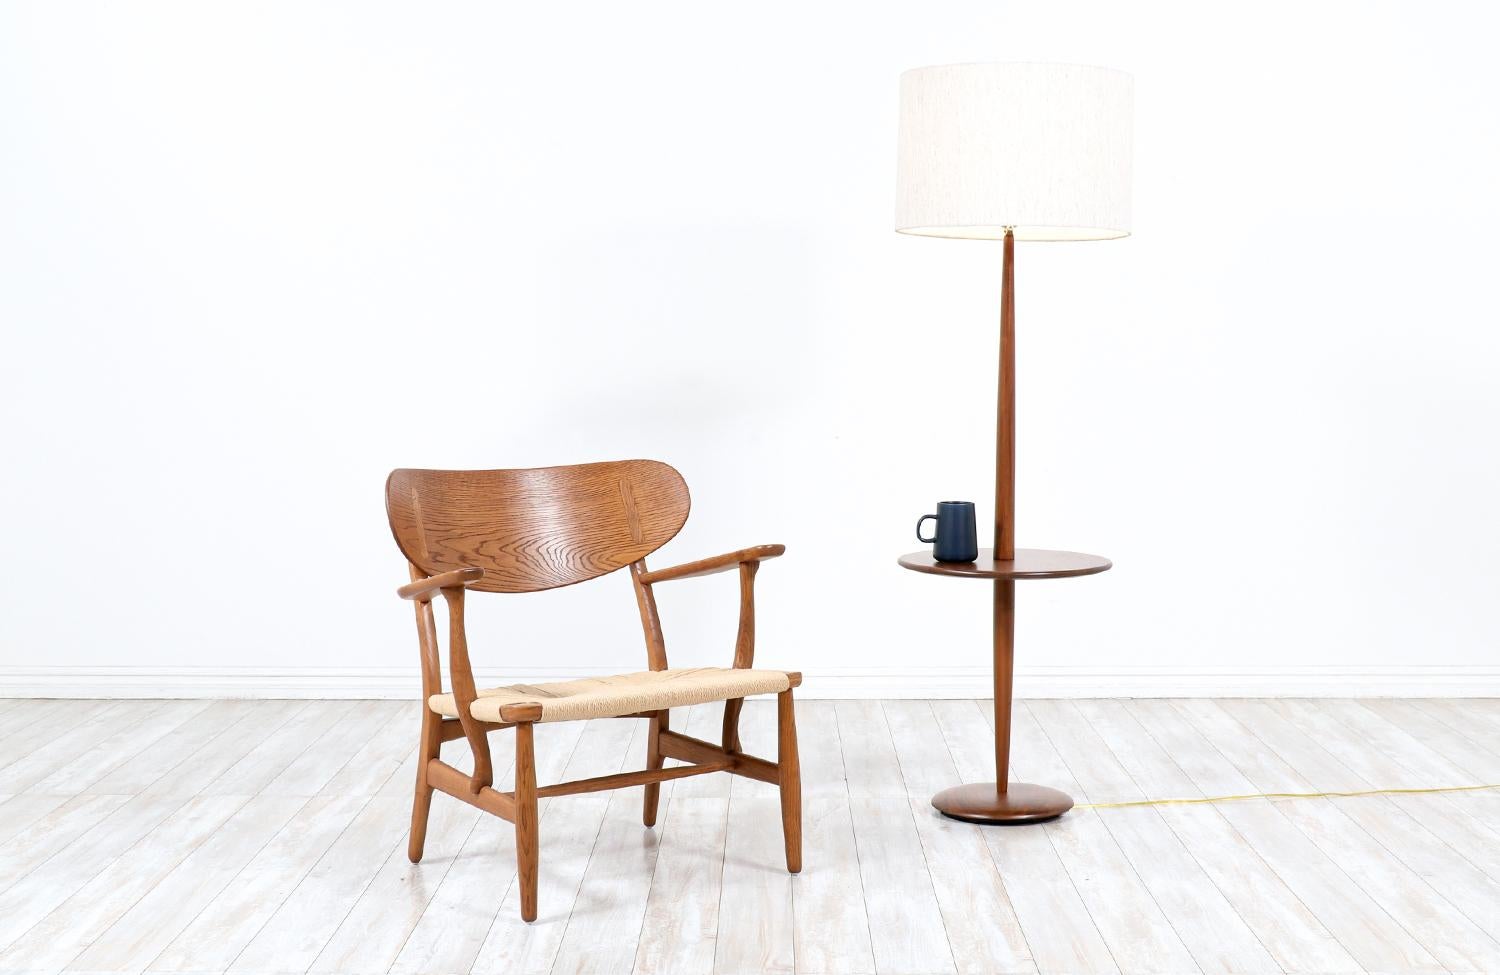 Floor Lamp manufactured by Laurel Lamp Co. in the United States circa 1960’s. This beautiful Mid-Century Modern lamp features a tall walnut wood body that supports a table. This lamp is newly rewired with new brass hardware and a custom linen